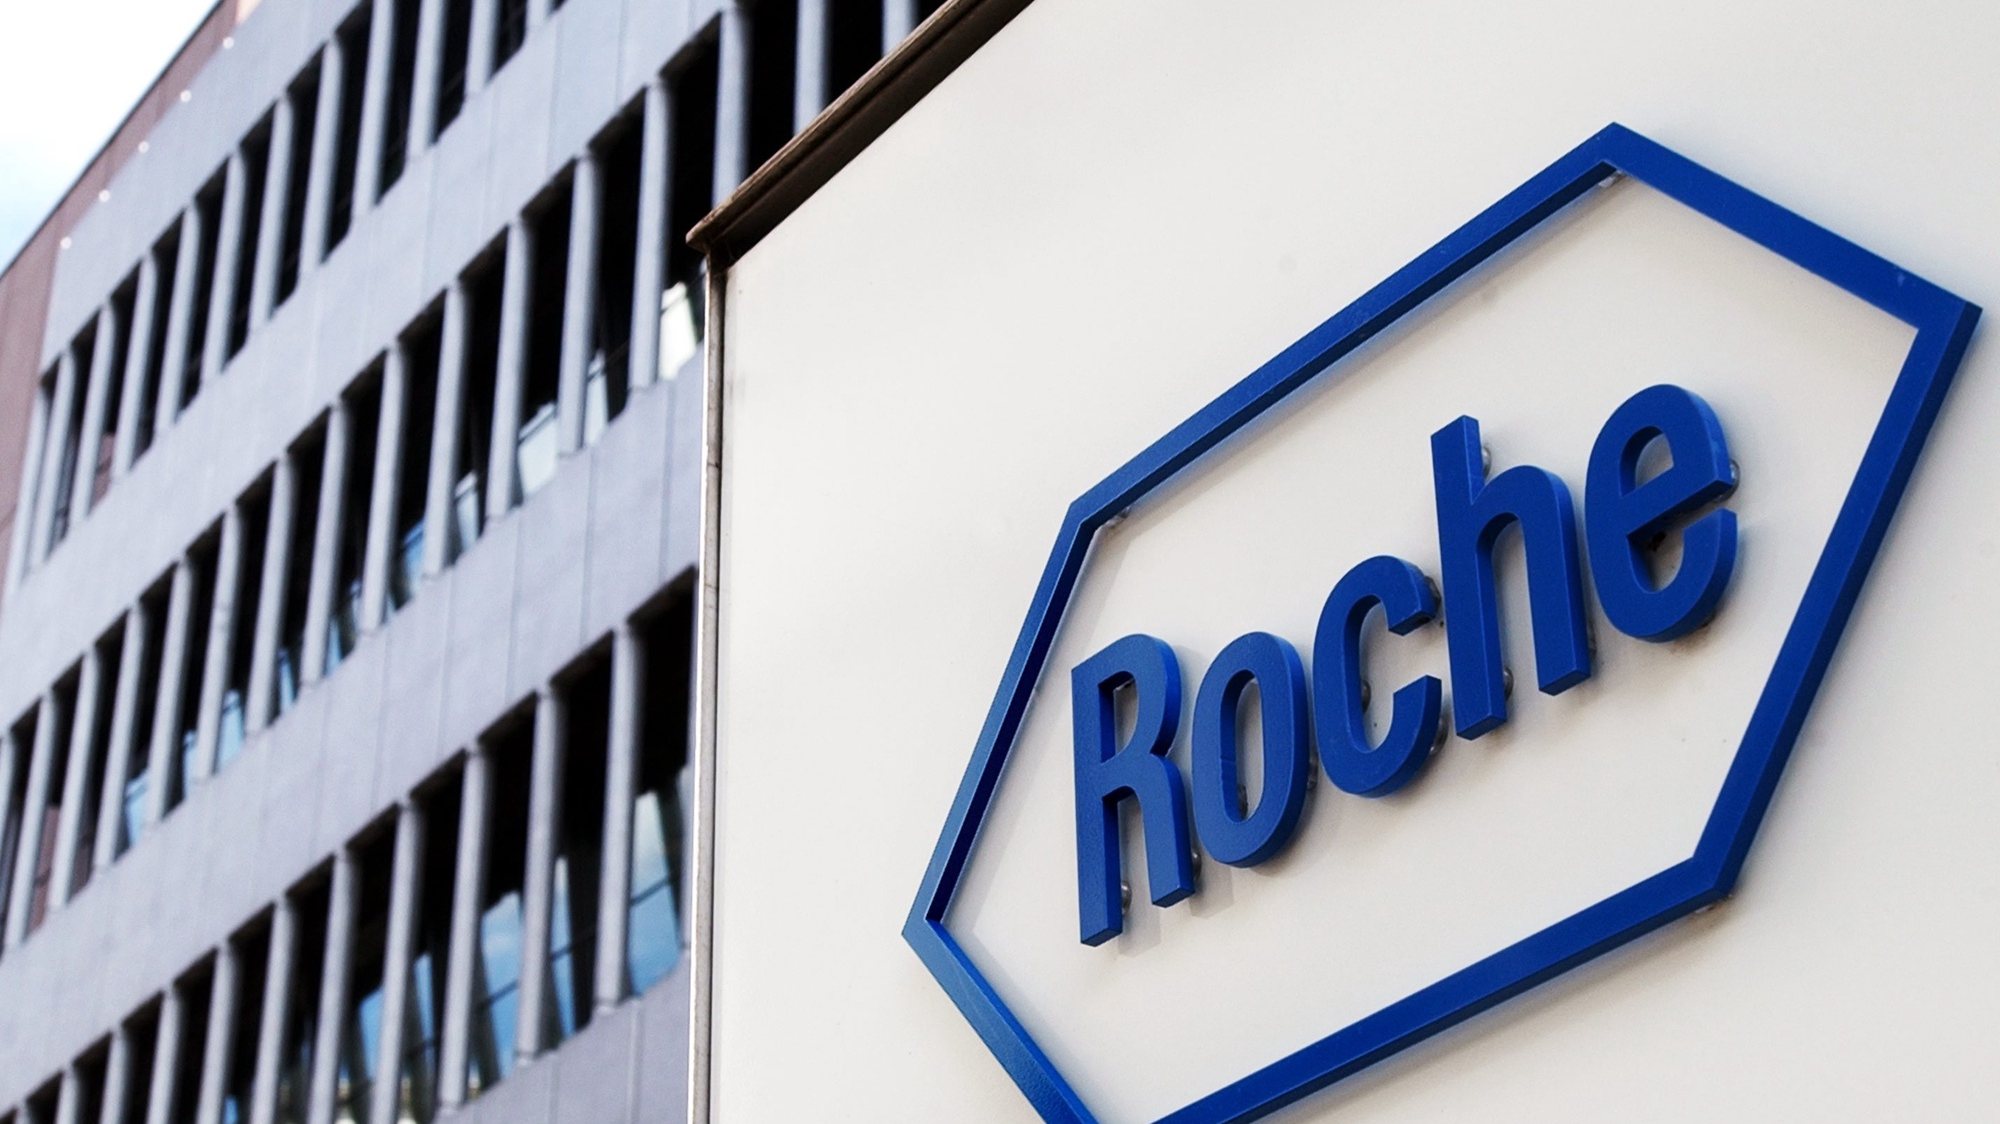 epa08747014 (FILE) - A file picture dated 12 August 2005 shows the logo of Swiss pharmaceutical company Roche at the headquarters in Basle, Switzerland (reissued 15 October 2020). Roche will publish their 3rd quarter 2020 results on 16 October 2020.  EPA/STEFFEN SCHMIDT *** Local Caption *** 56232040